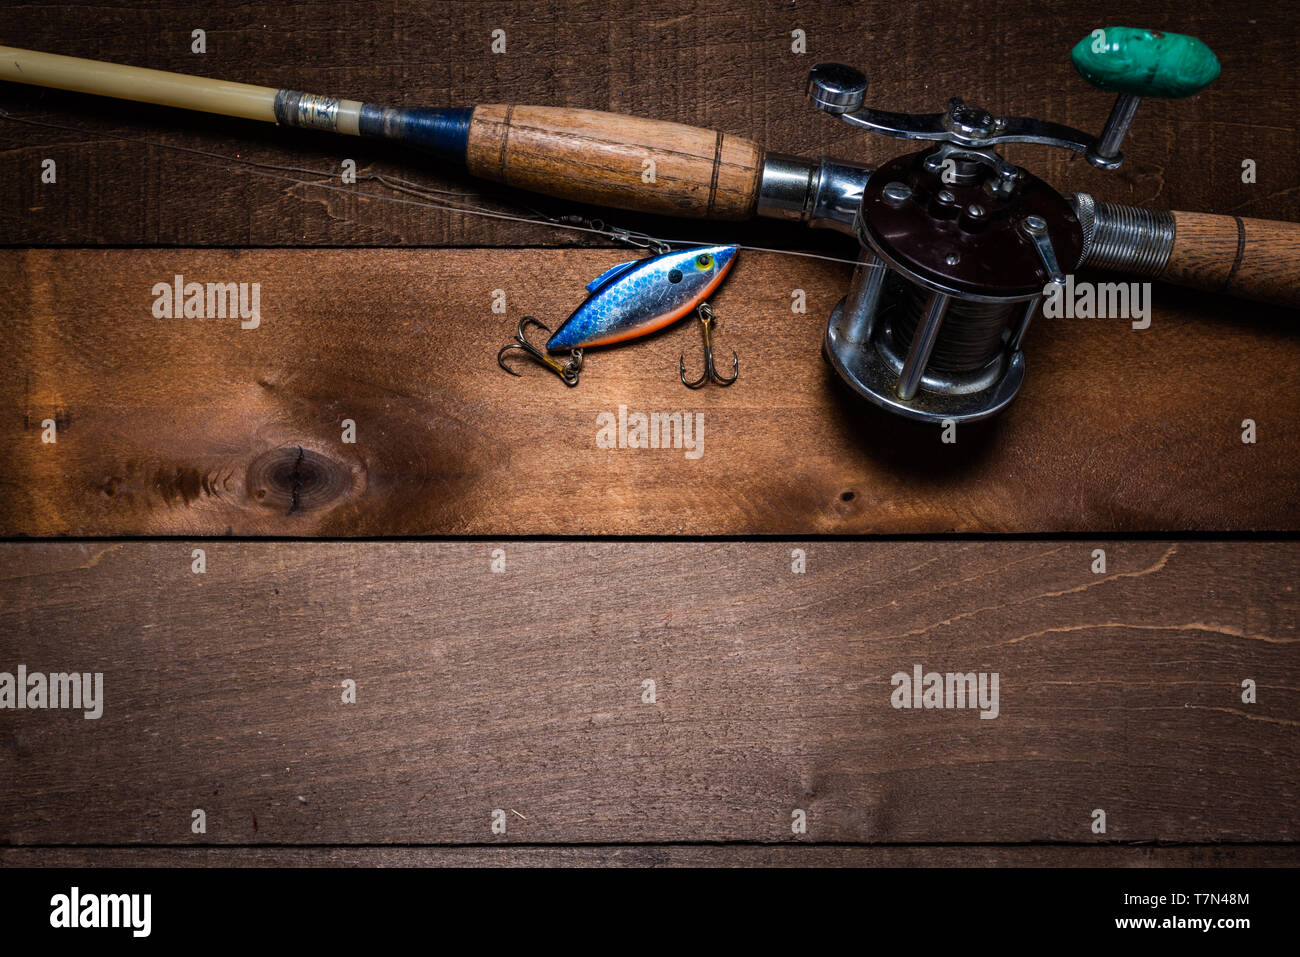 615 Antique Fishing Reel Images, Stock Photos, 3D objects